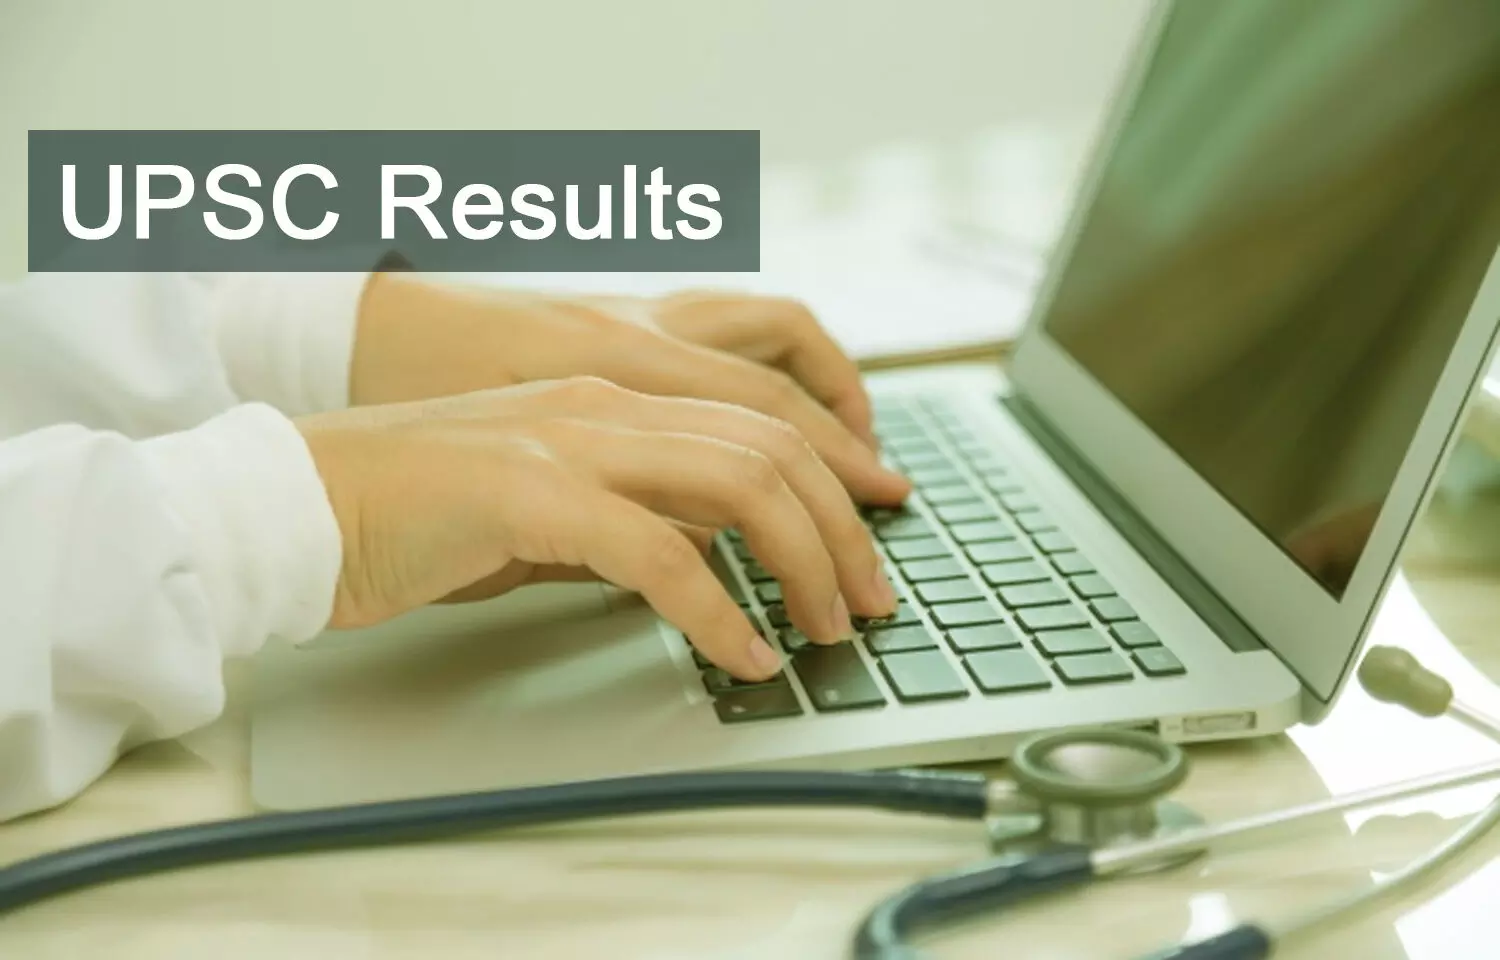 UPSC Combined Medical Services Exam 2020 final results OUT, View merit list here